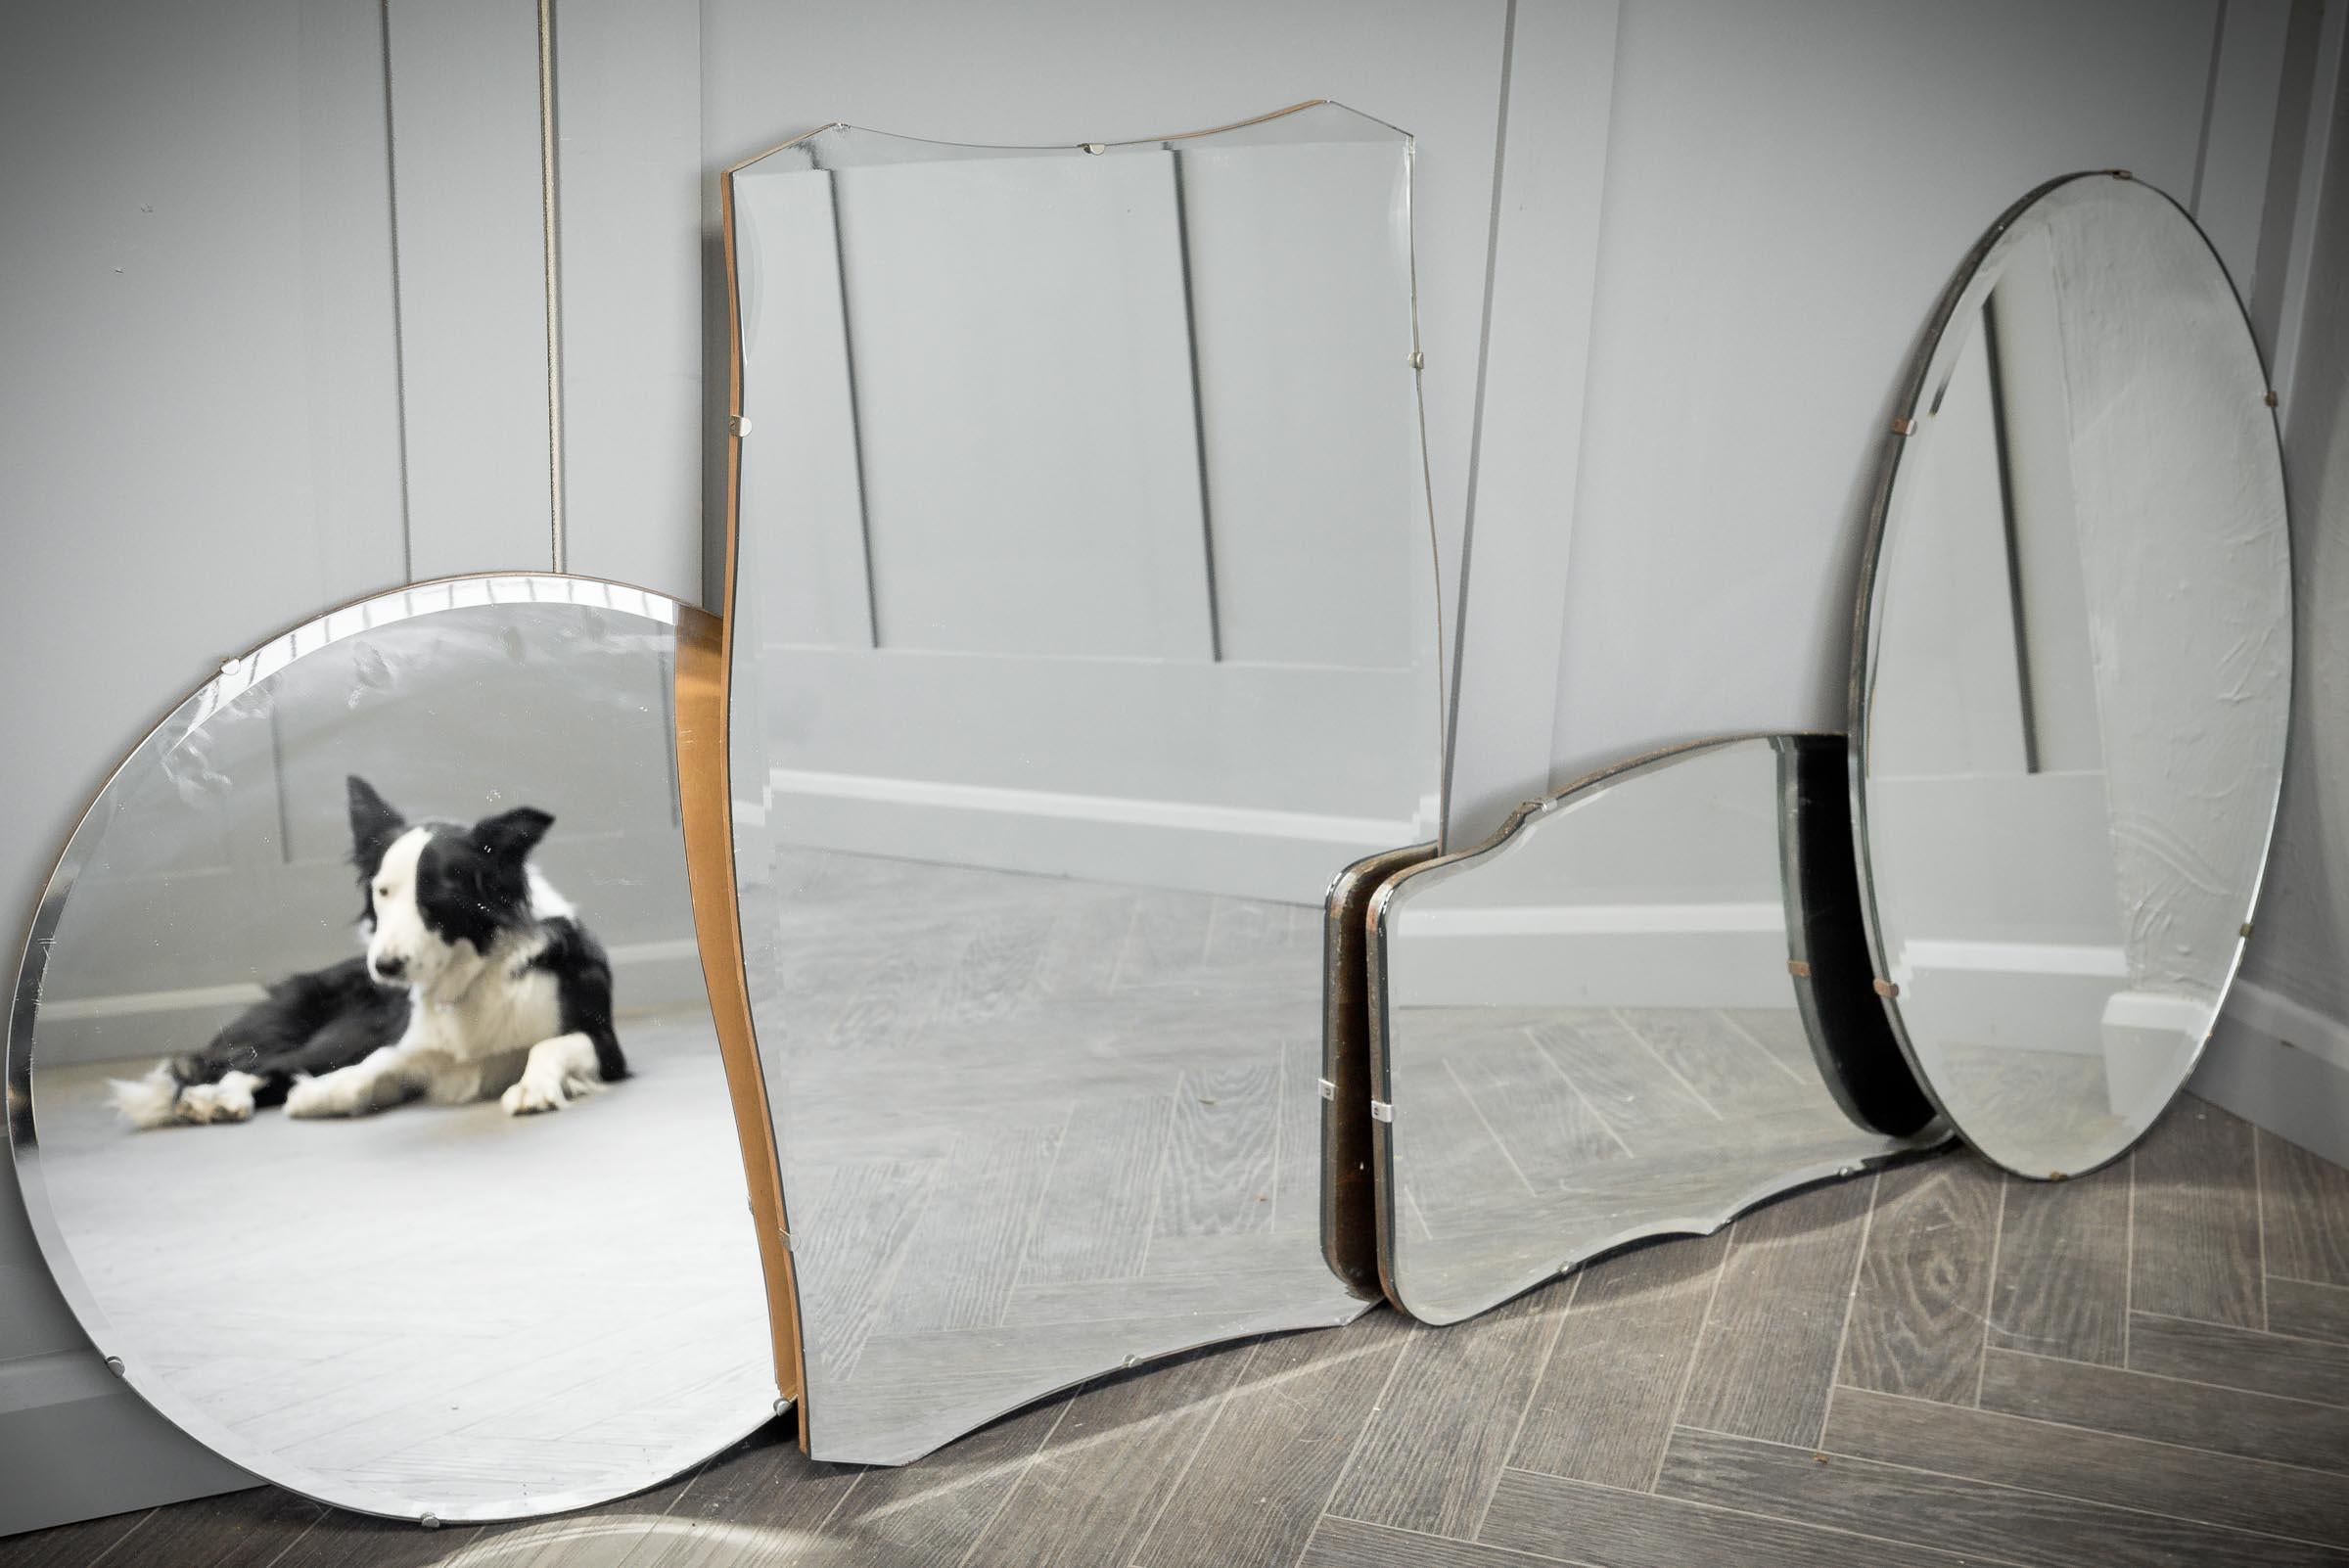 A classic collection of four stunning beveled mirrors comprising of striking shapes and sizes. Please be aware sizing stated is not exact sizes of mirrors please message us for correct sizing.